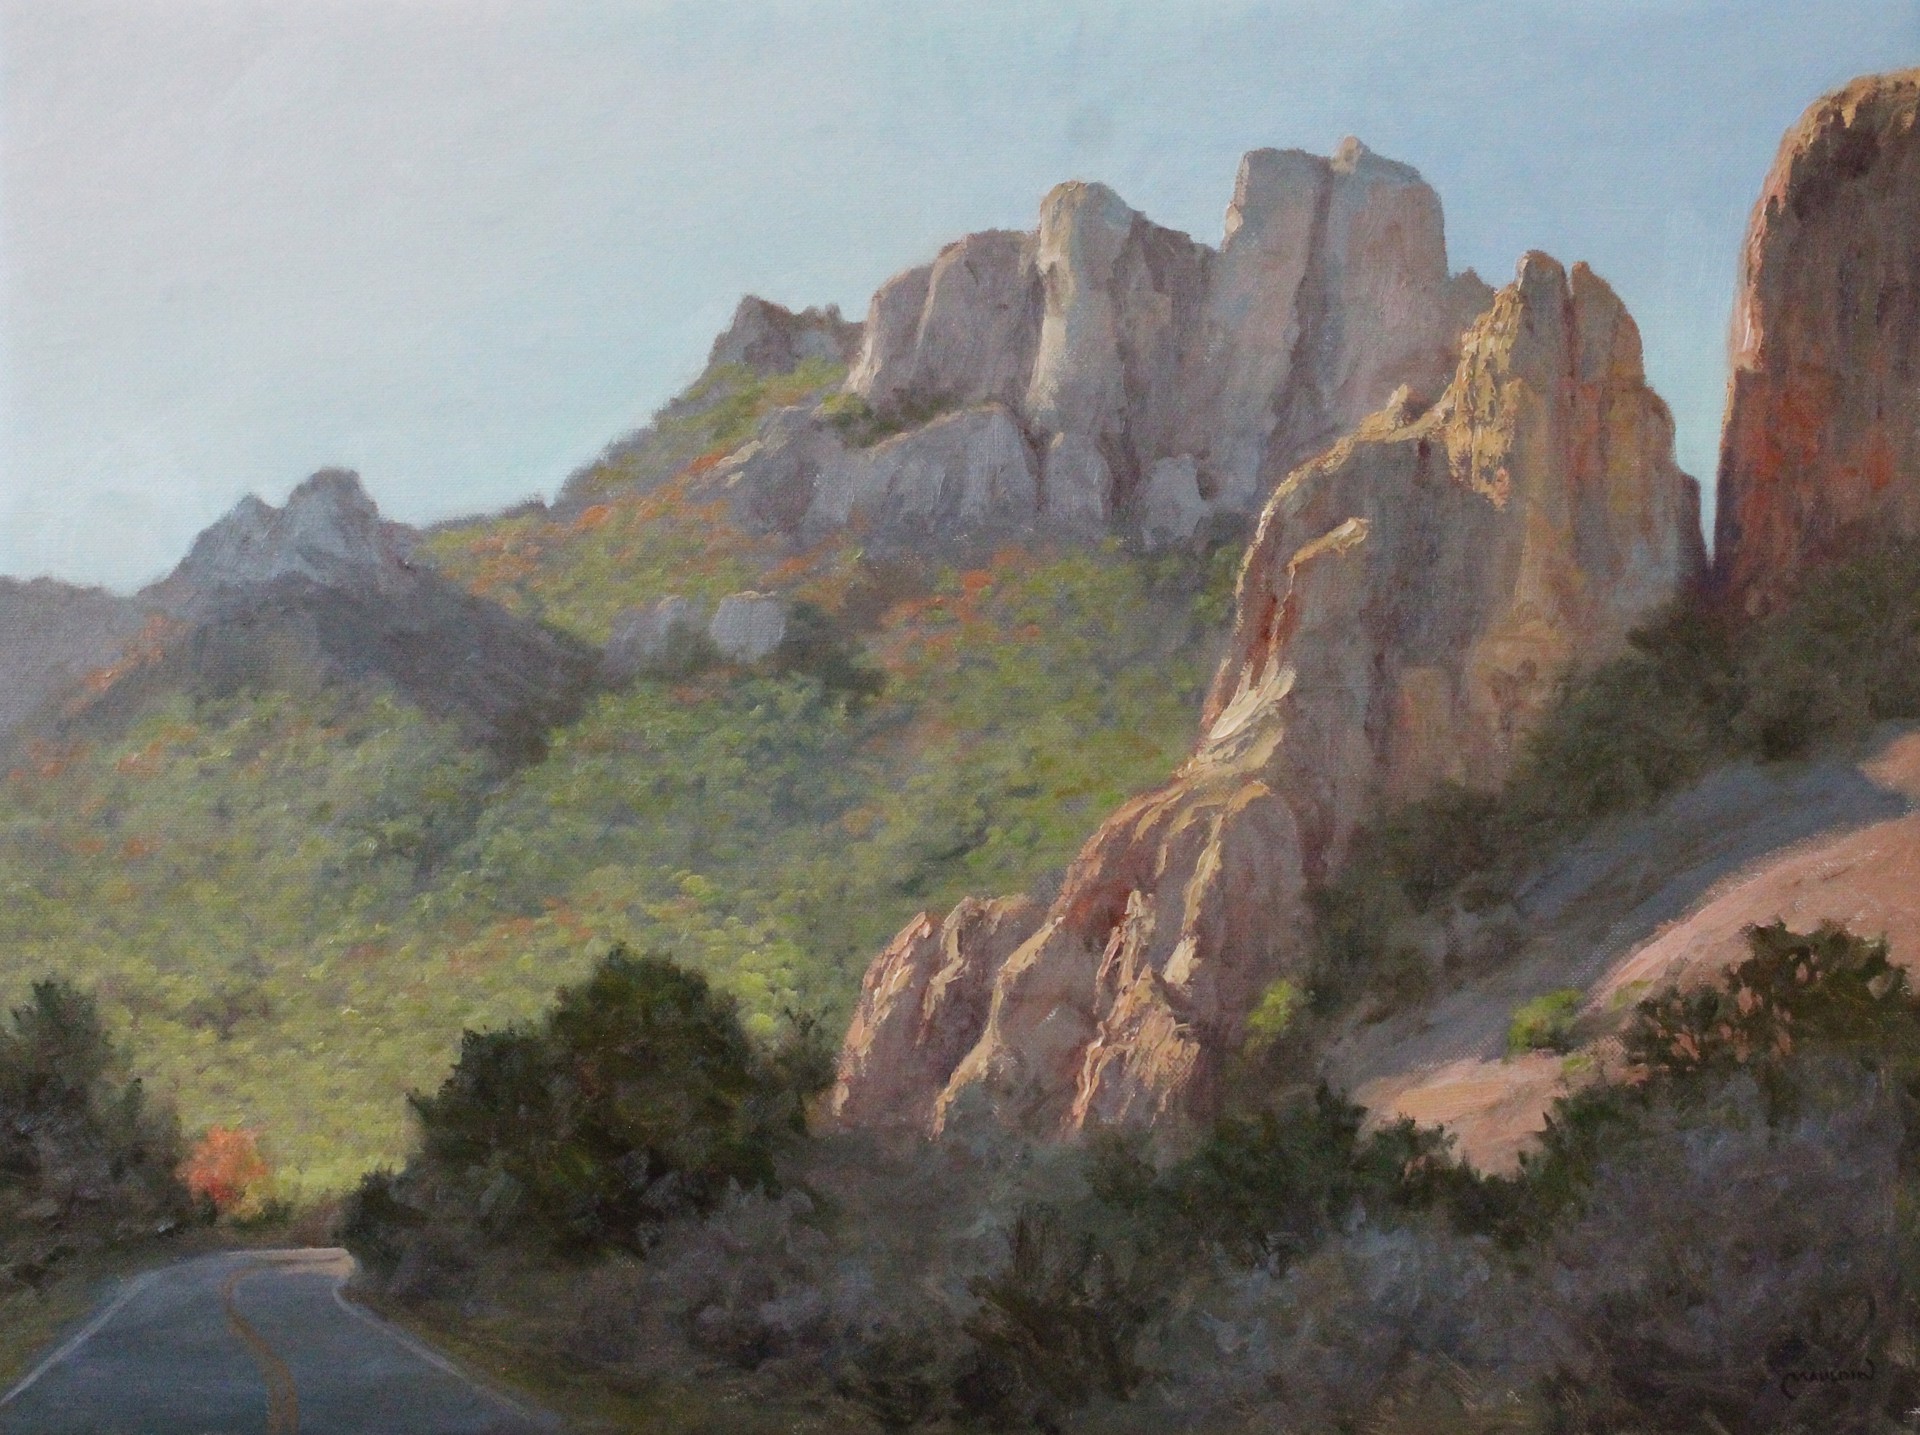 The Road to Chisos Basin by Chuck Mauldin